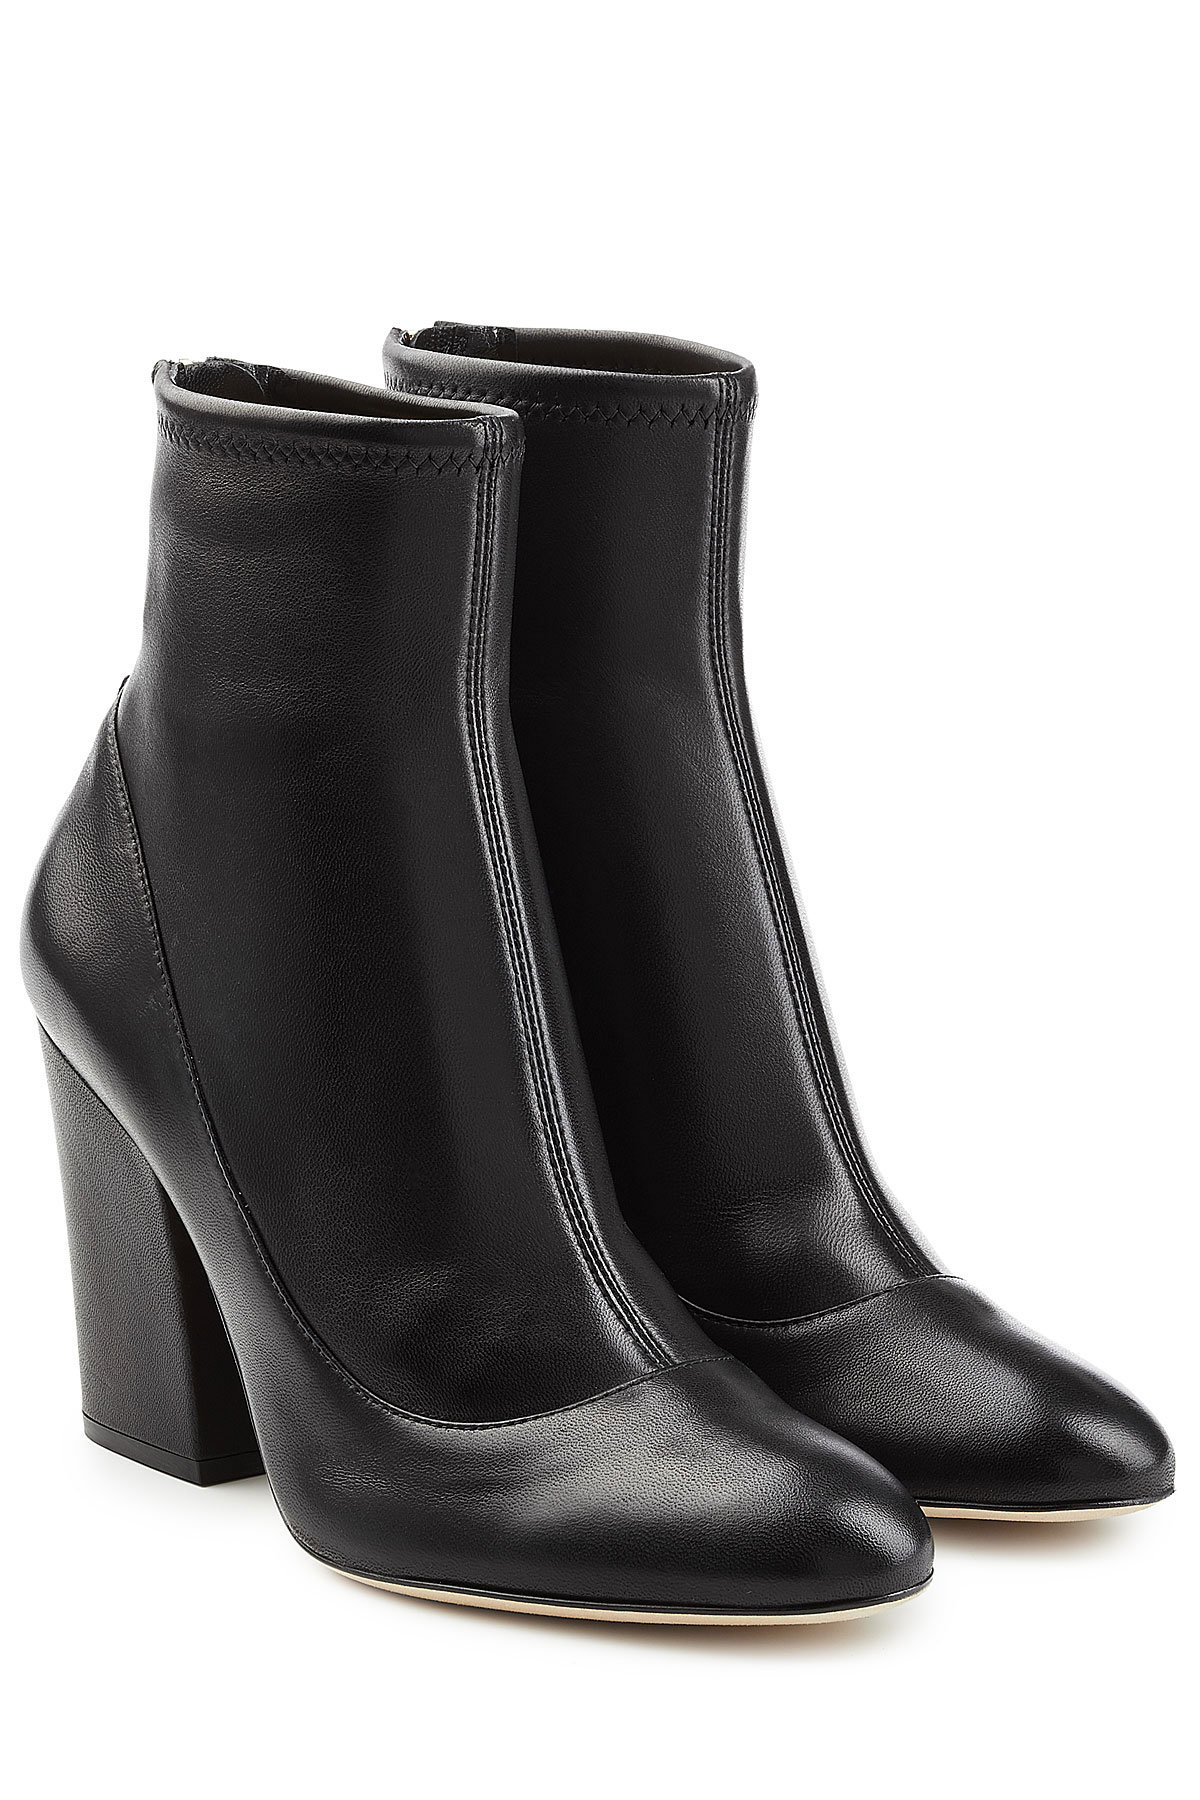 Sergio Rossi - Virgina Leather Ankle Boots